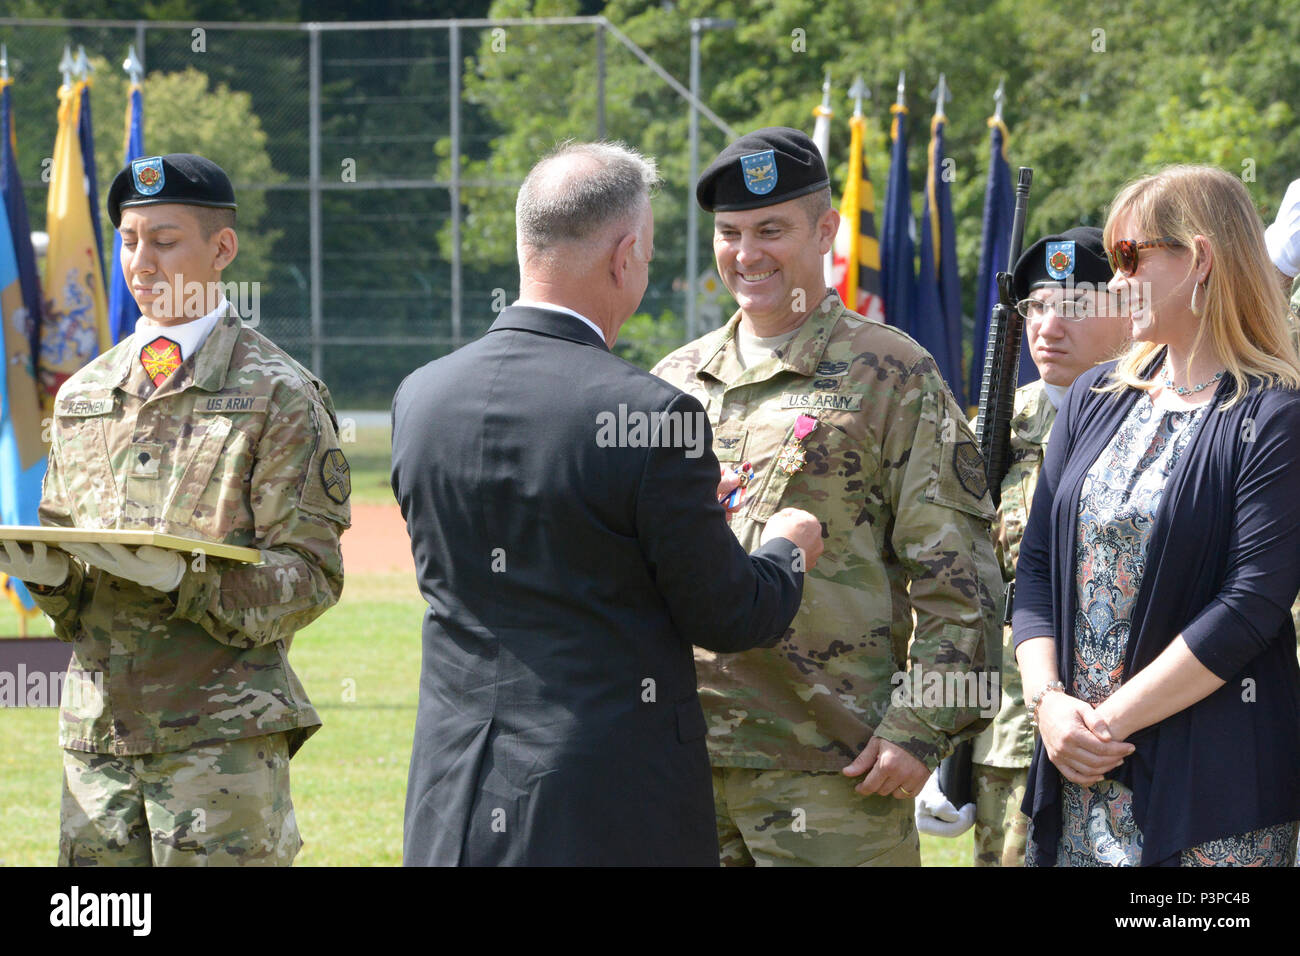 ANSBACH, Germany (July 21, 2016) – Michael D. Formica, director of Installation Management Command – Europe, thanks Col. Christopher M. Benson, outgoing commander of U.S. Army Garrison Ansbach, for Benson’s service and performance. Benson’s retirement ceremony followed the USAG Ansbach change of command Monday at Barton Barracks here. Stock Photo